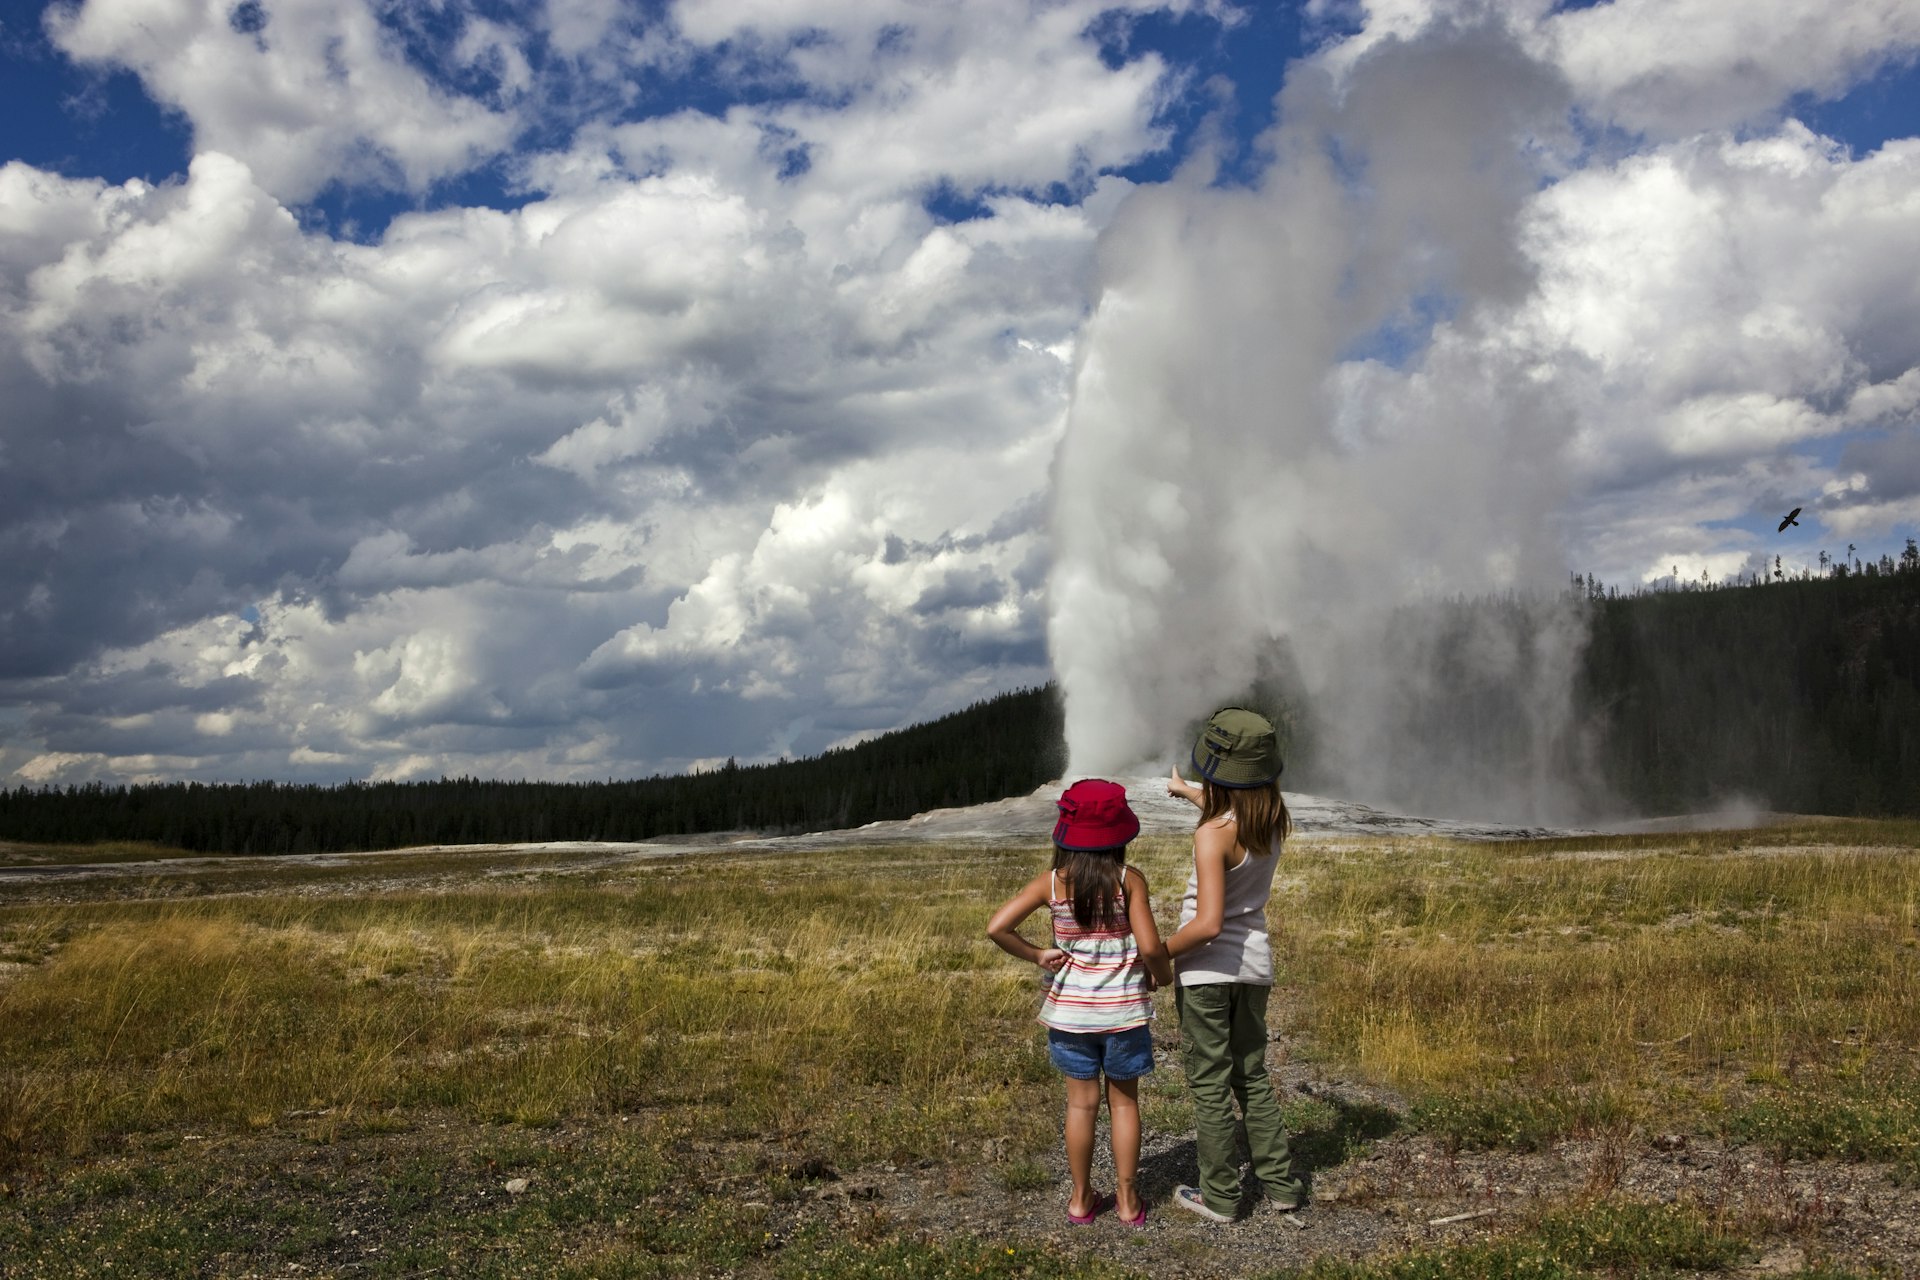 Two young girls watching Old Faithful erupt on a cloudy day